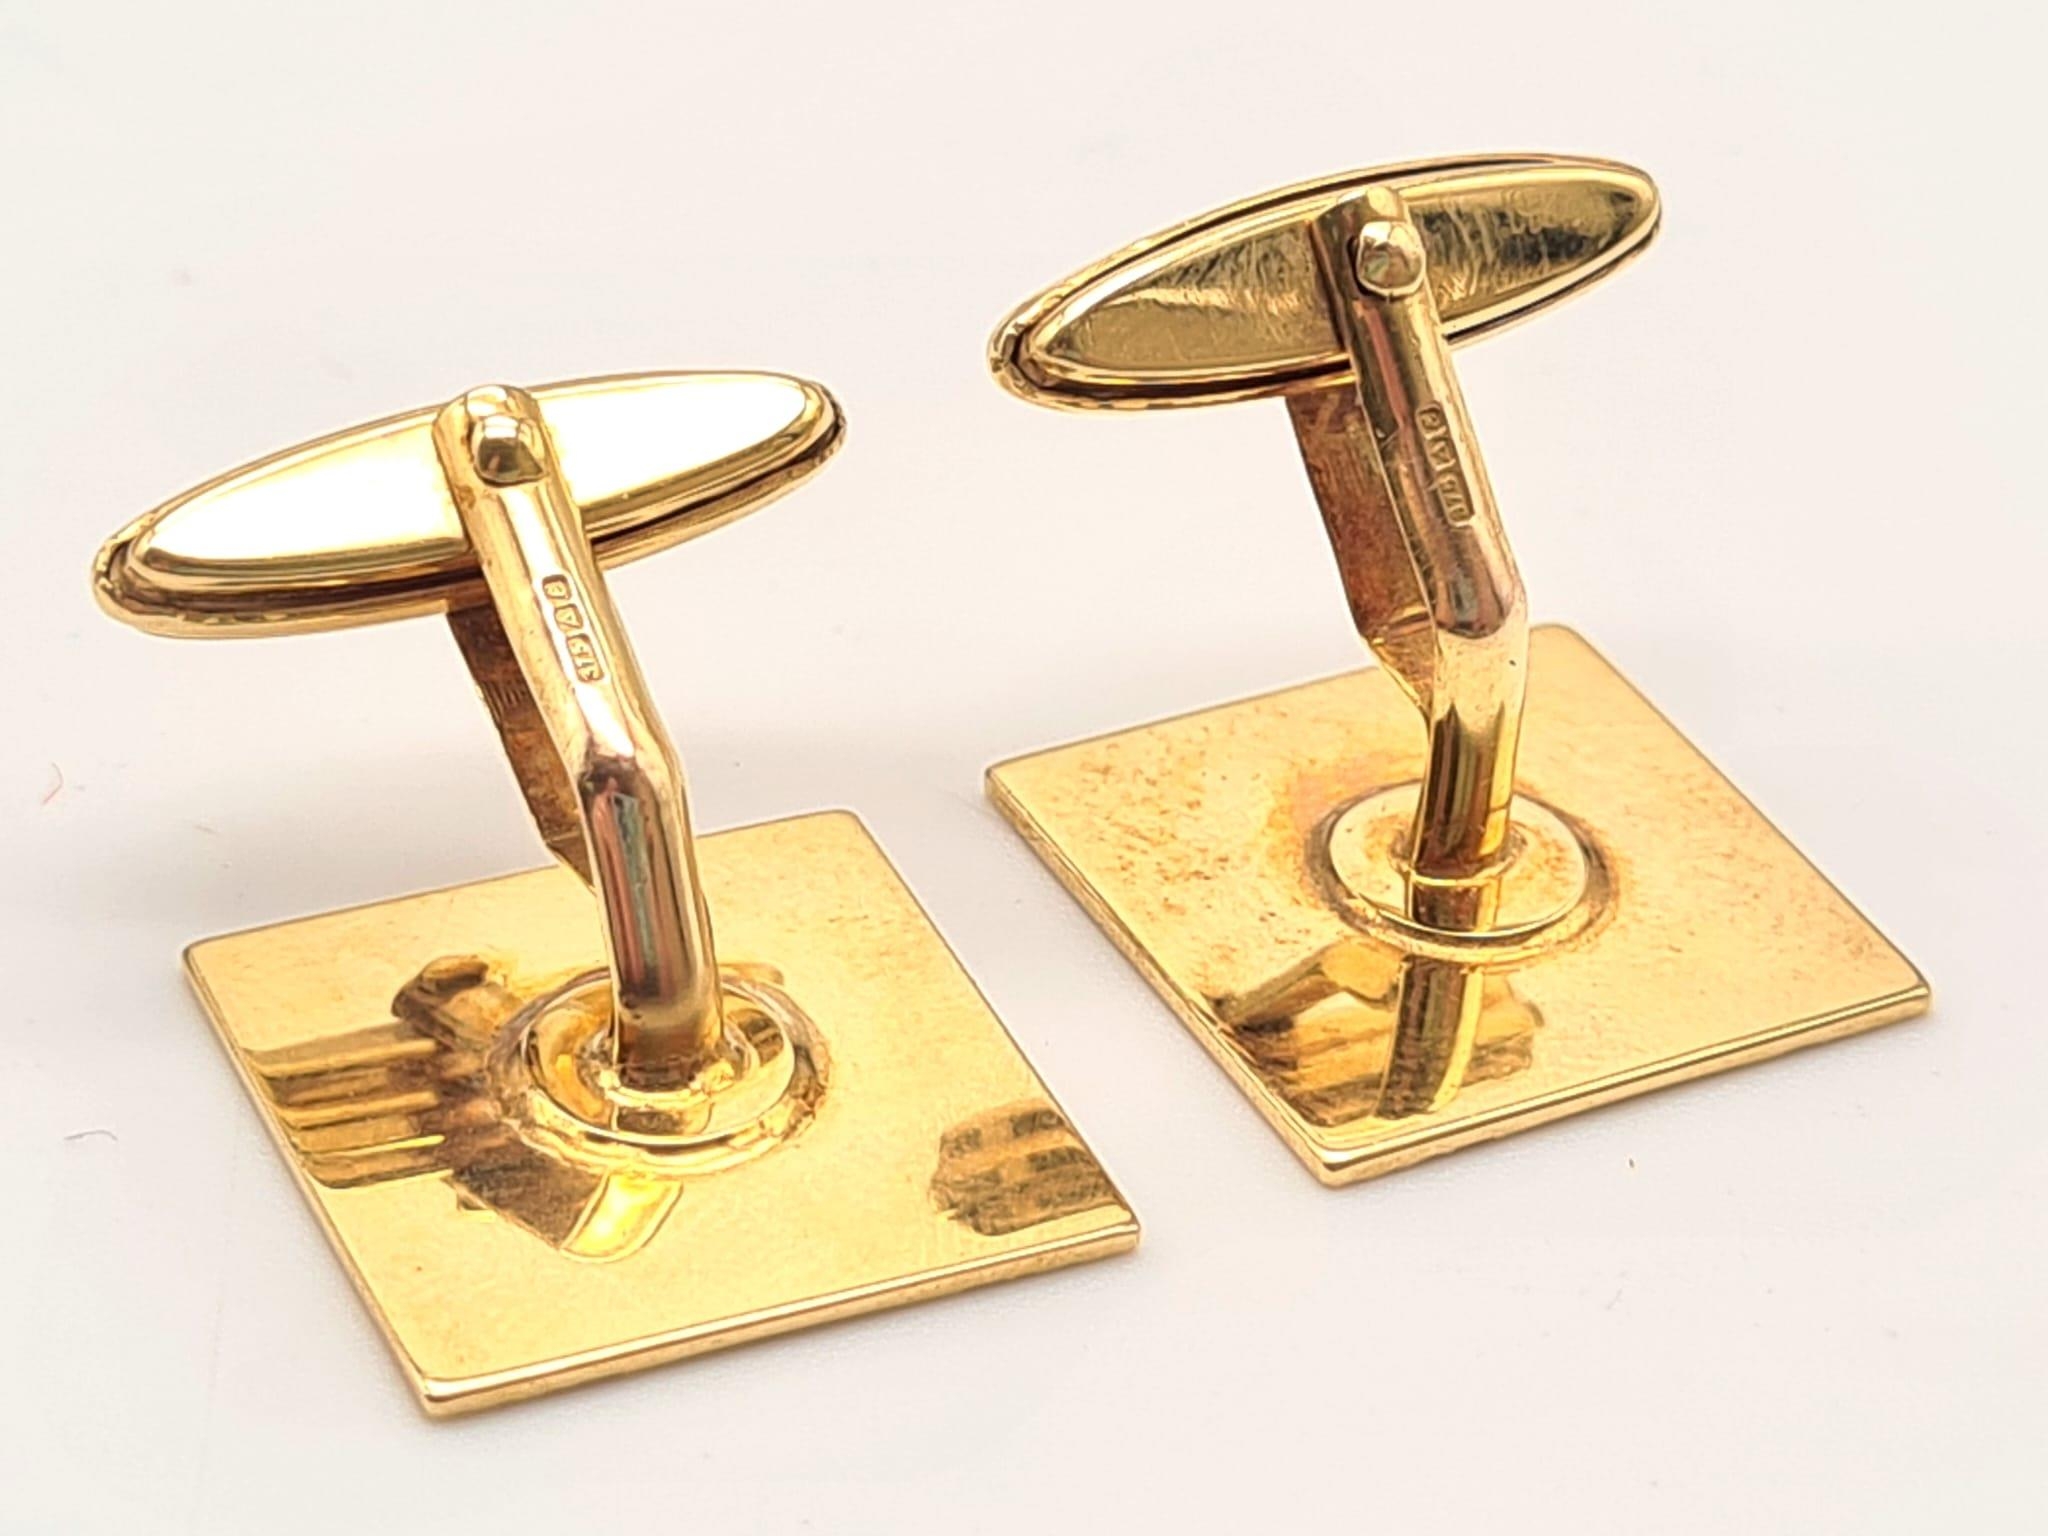 A Pair of Vintage 9K Yellow Gold Flat-Square Cufflinks - these are making a comeback! 7.06g total - Image 3 of 7